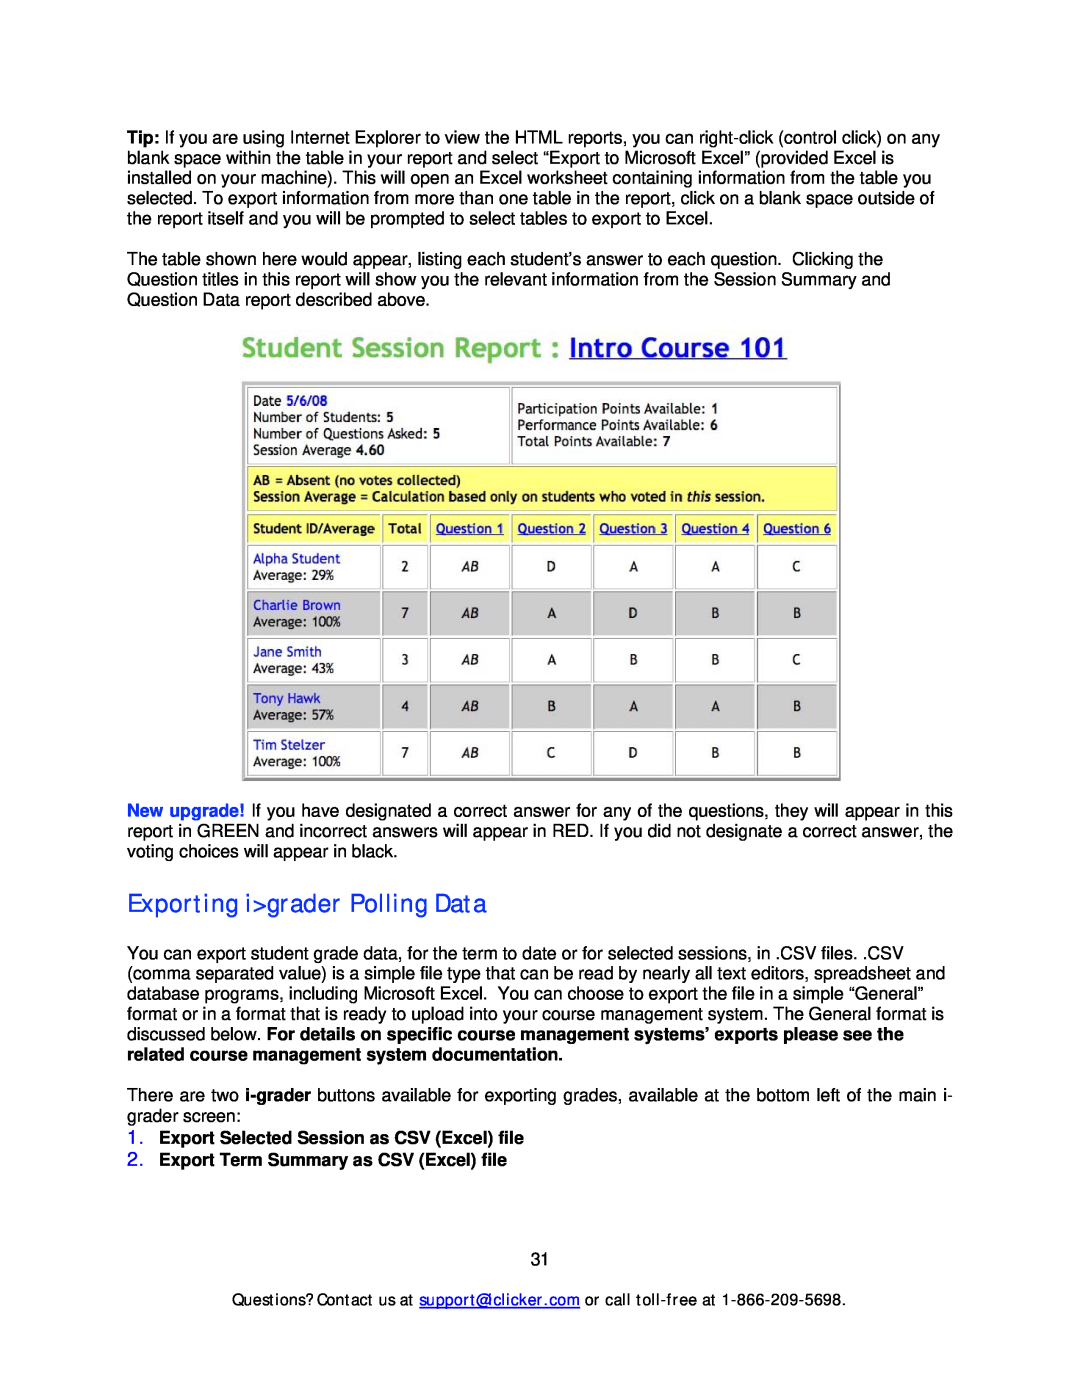 Apple Mouse manual Exporting igrader Polling Data, Export Selected Session as CSV Excel file 